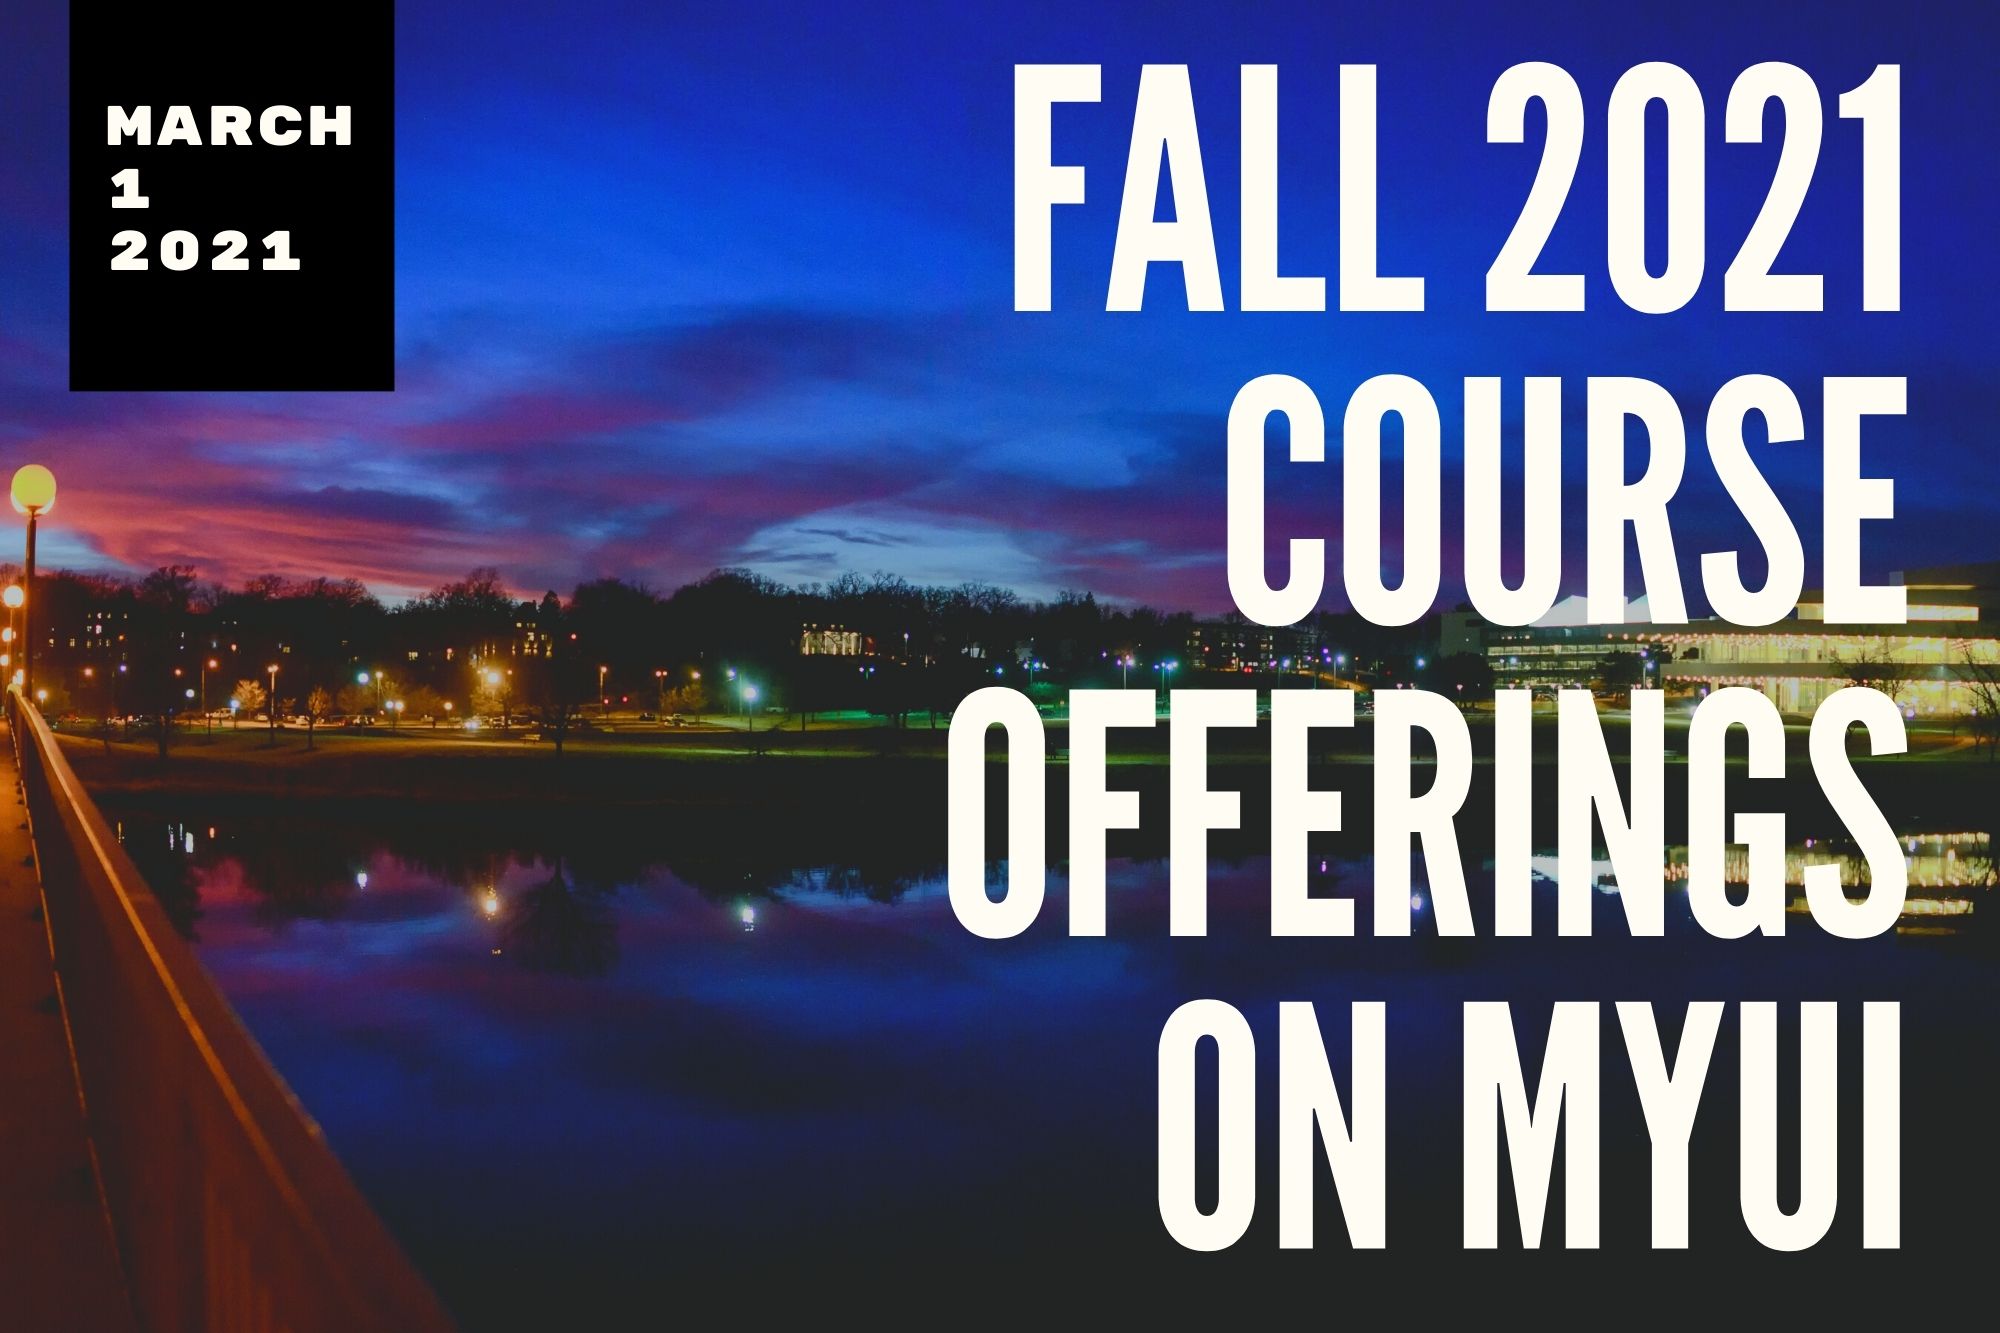 Fall 2021 courses on MyUI